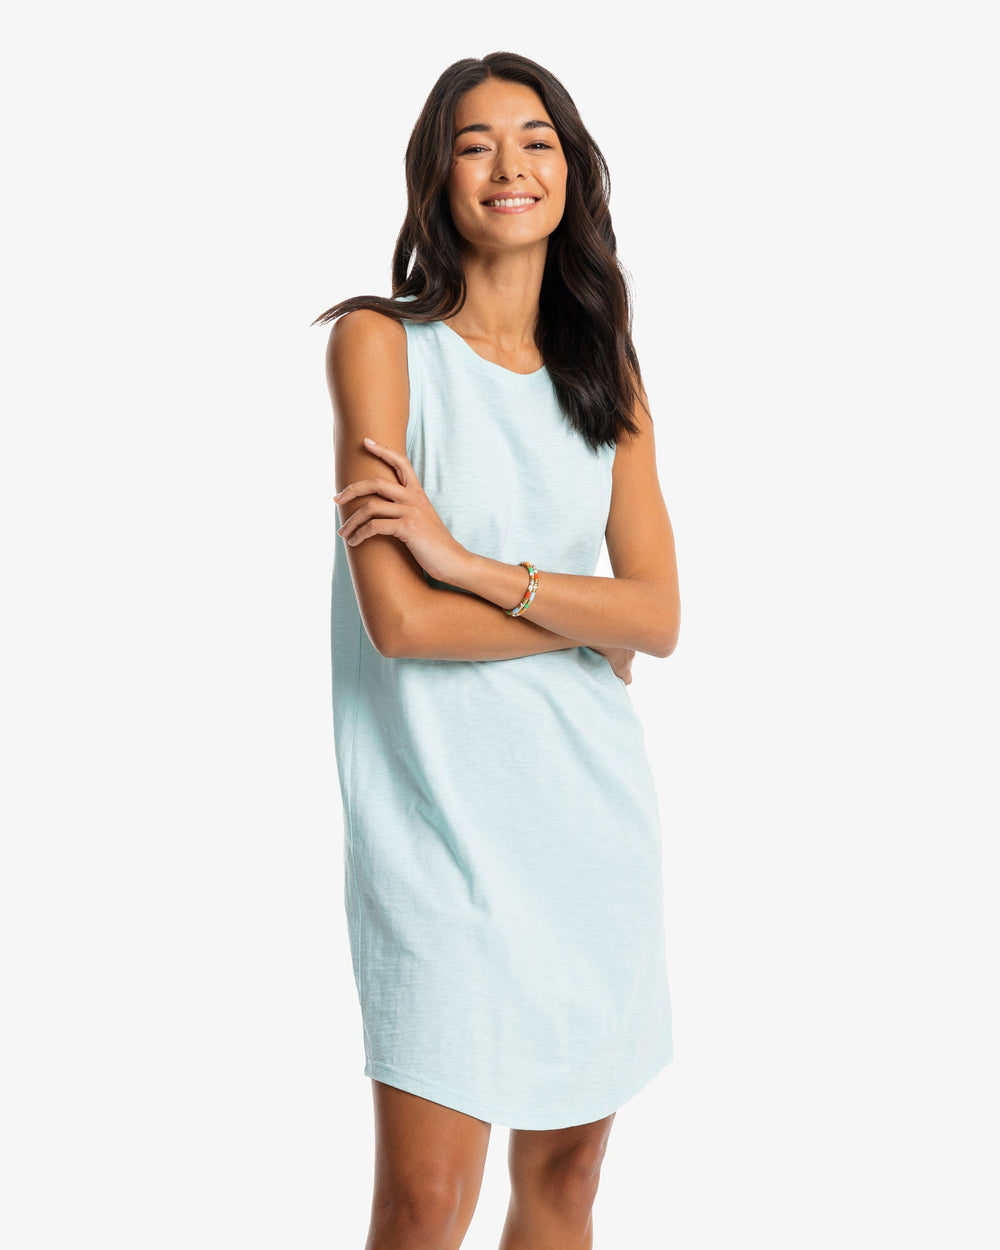 The model front view of the Women's Portia Sun Farer Sleeveless Dress by Southern Tide - Wake Blue